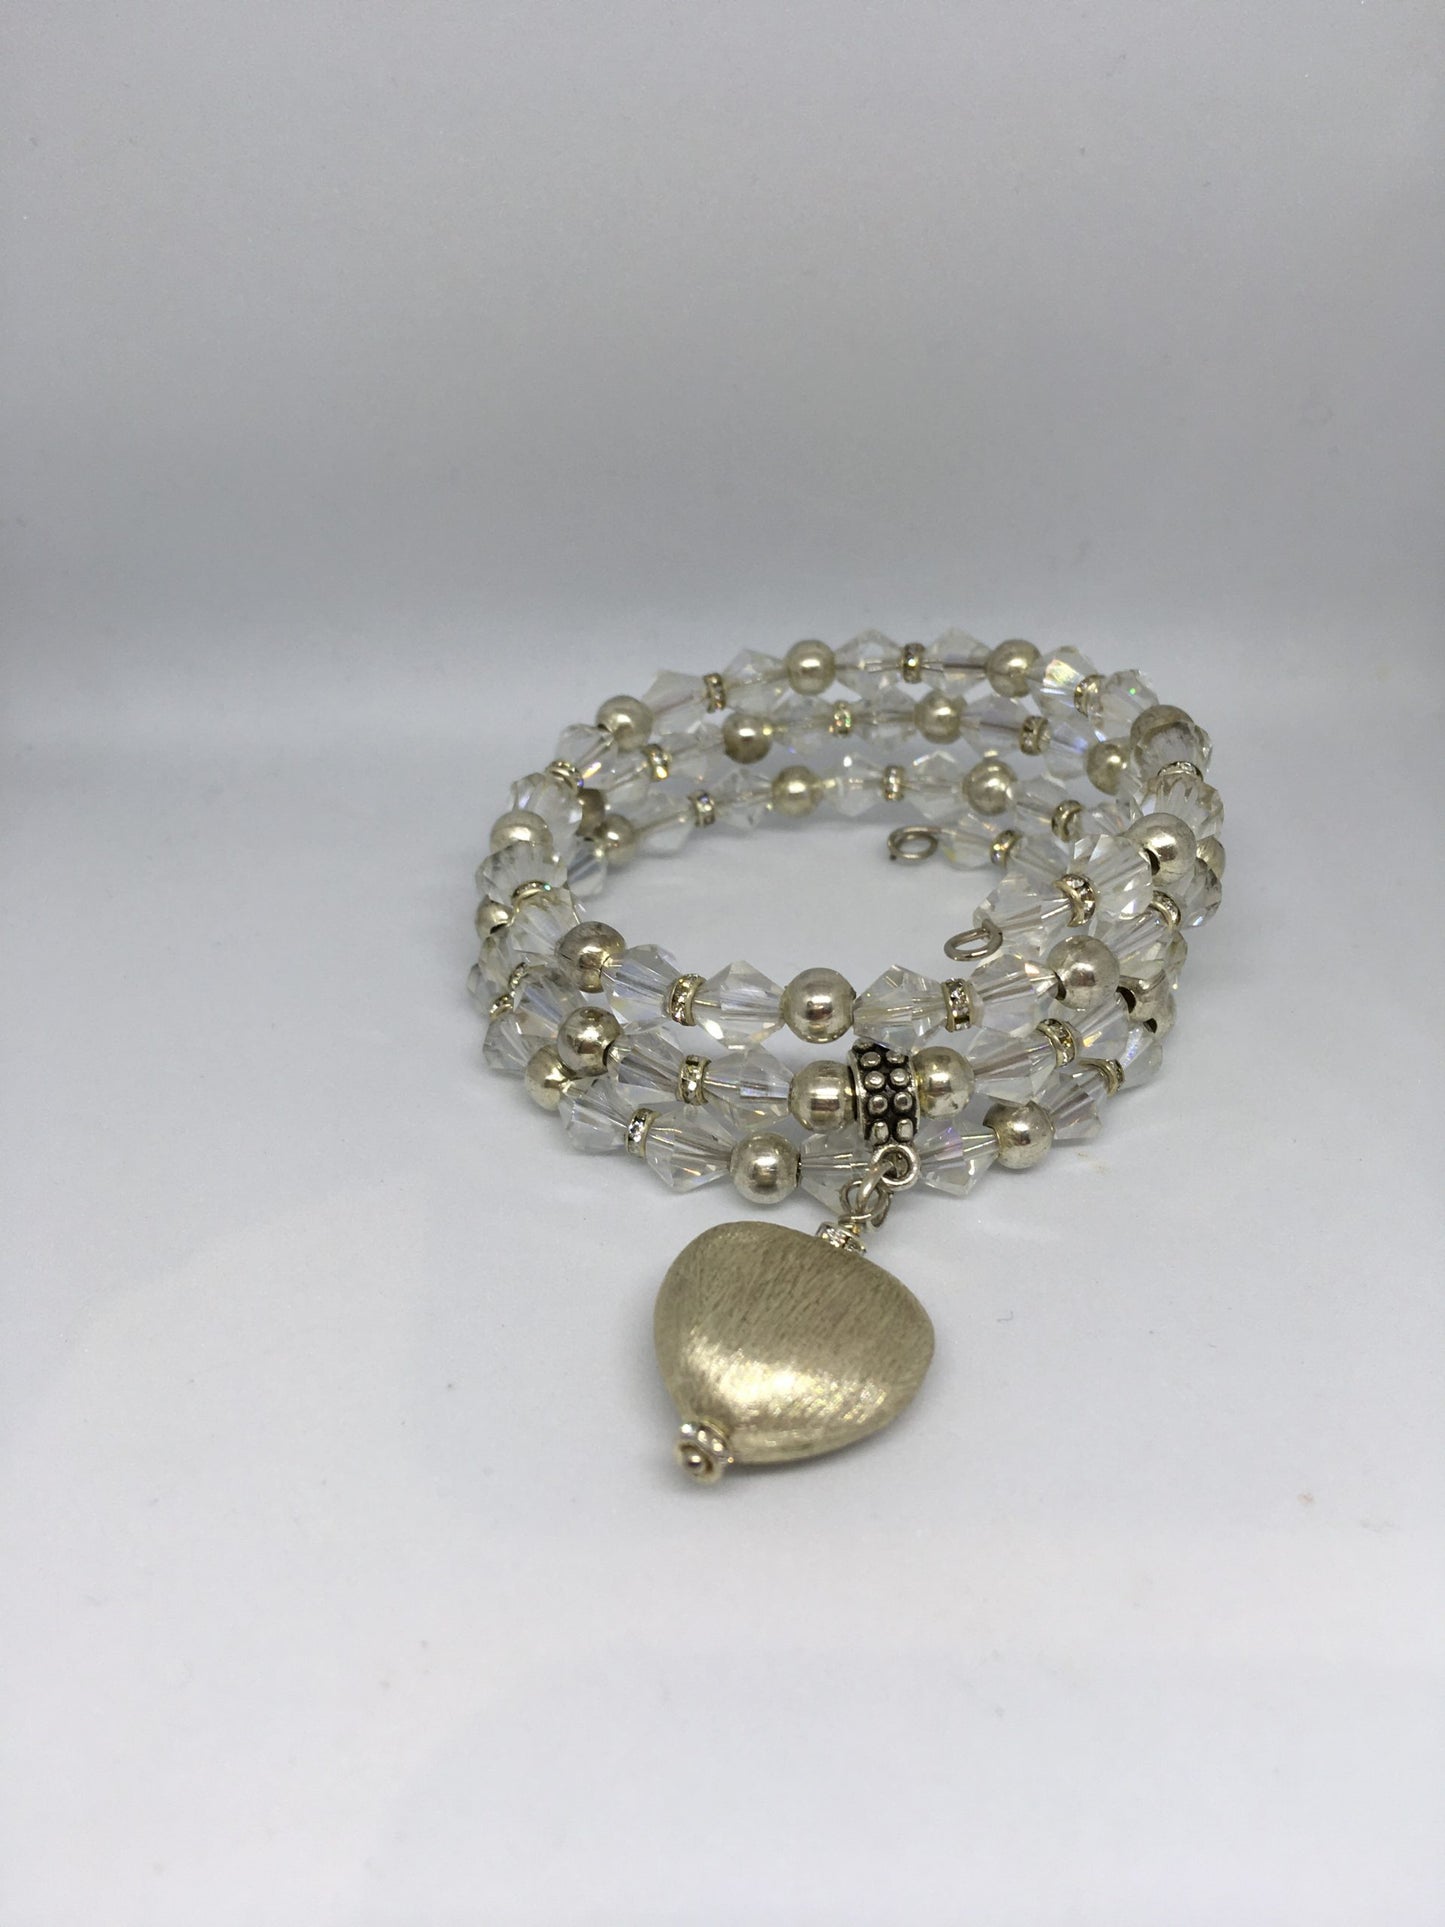 MEMORY WIRE CLEAR AB CRYSTAL BRACELET